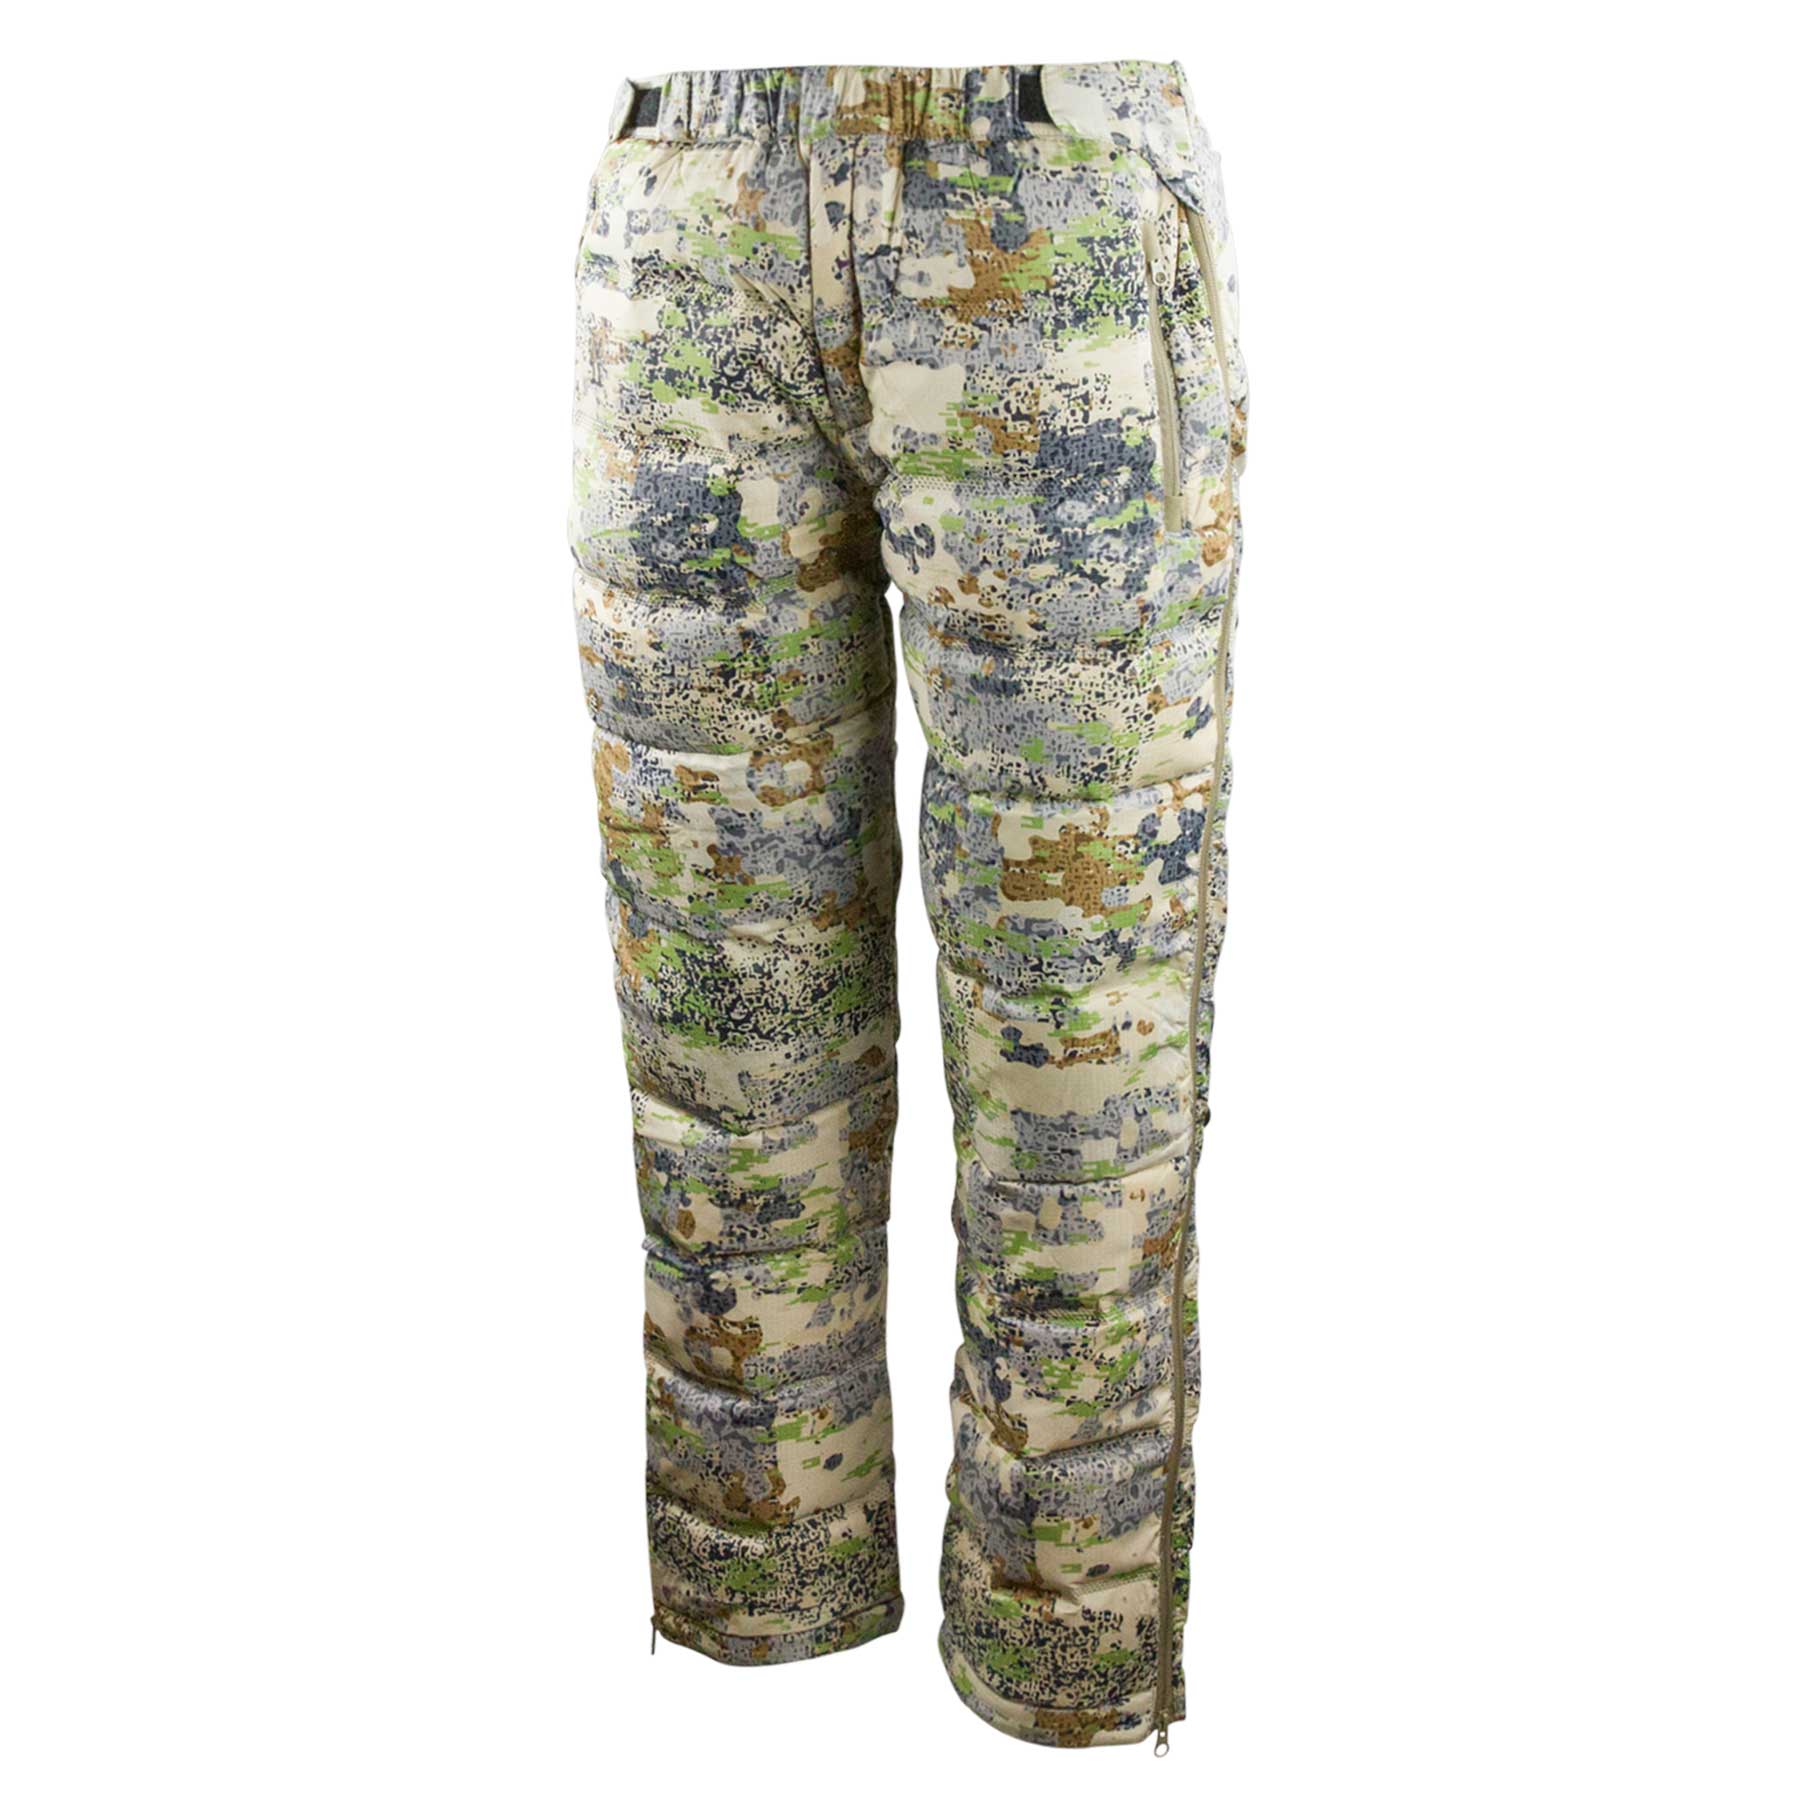 Men's ThermoNeutral Down Hunting Pants - Exposed Camo - FORLOH